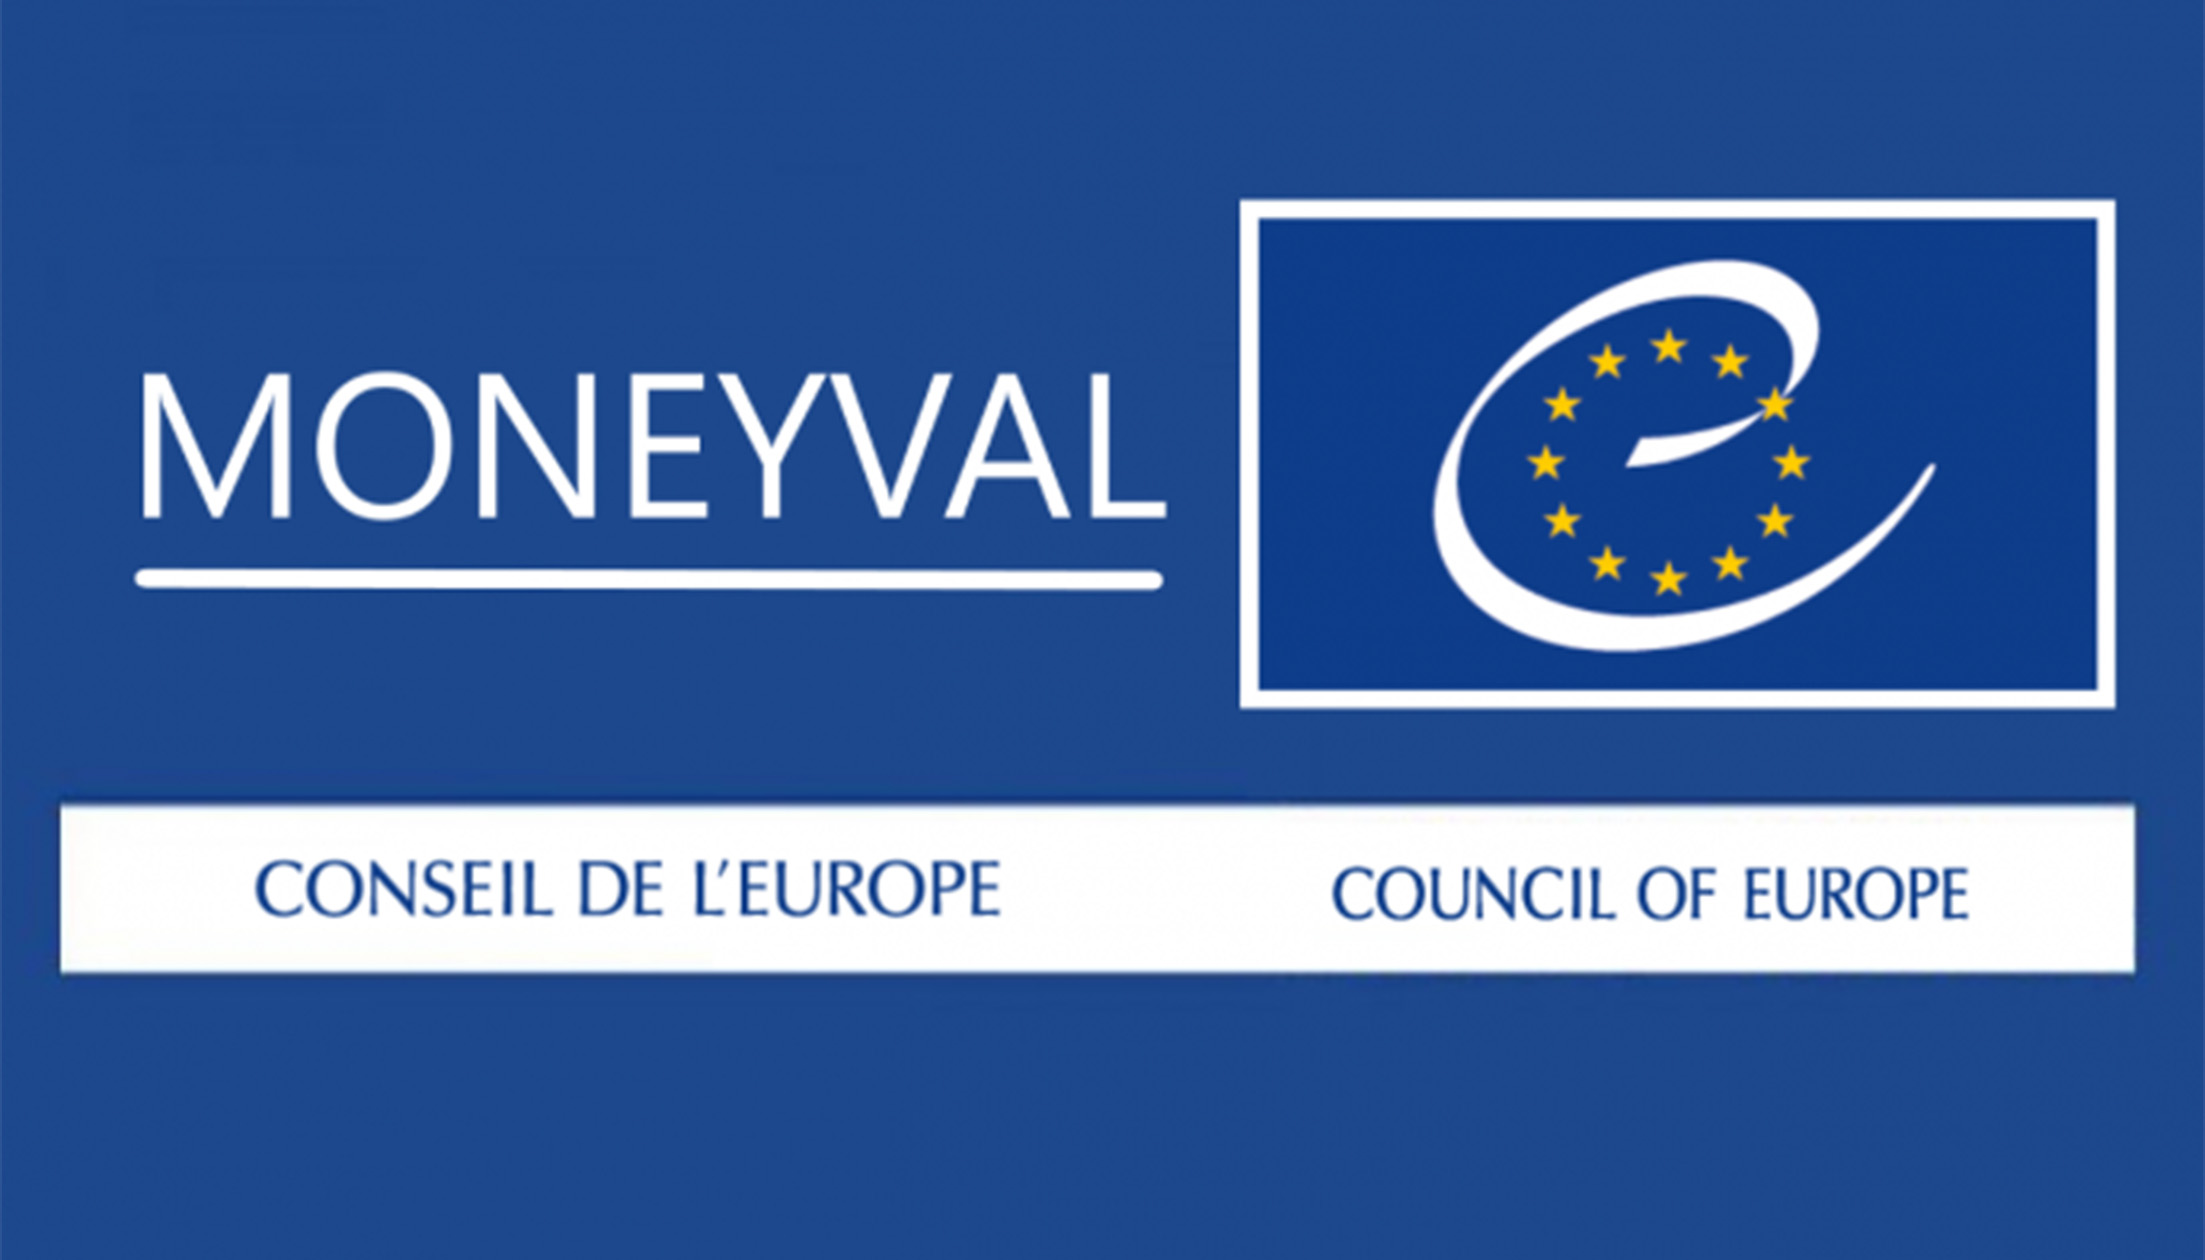 Malta welcomes MONEYVAL report findings and commits to implementation plan